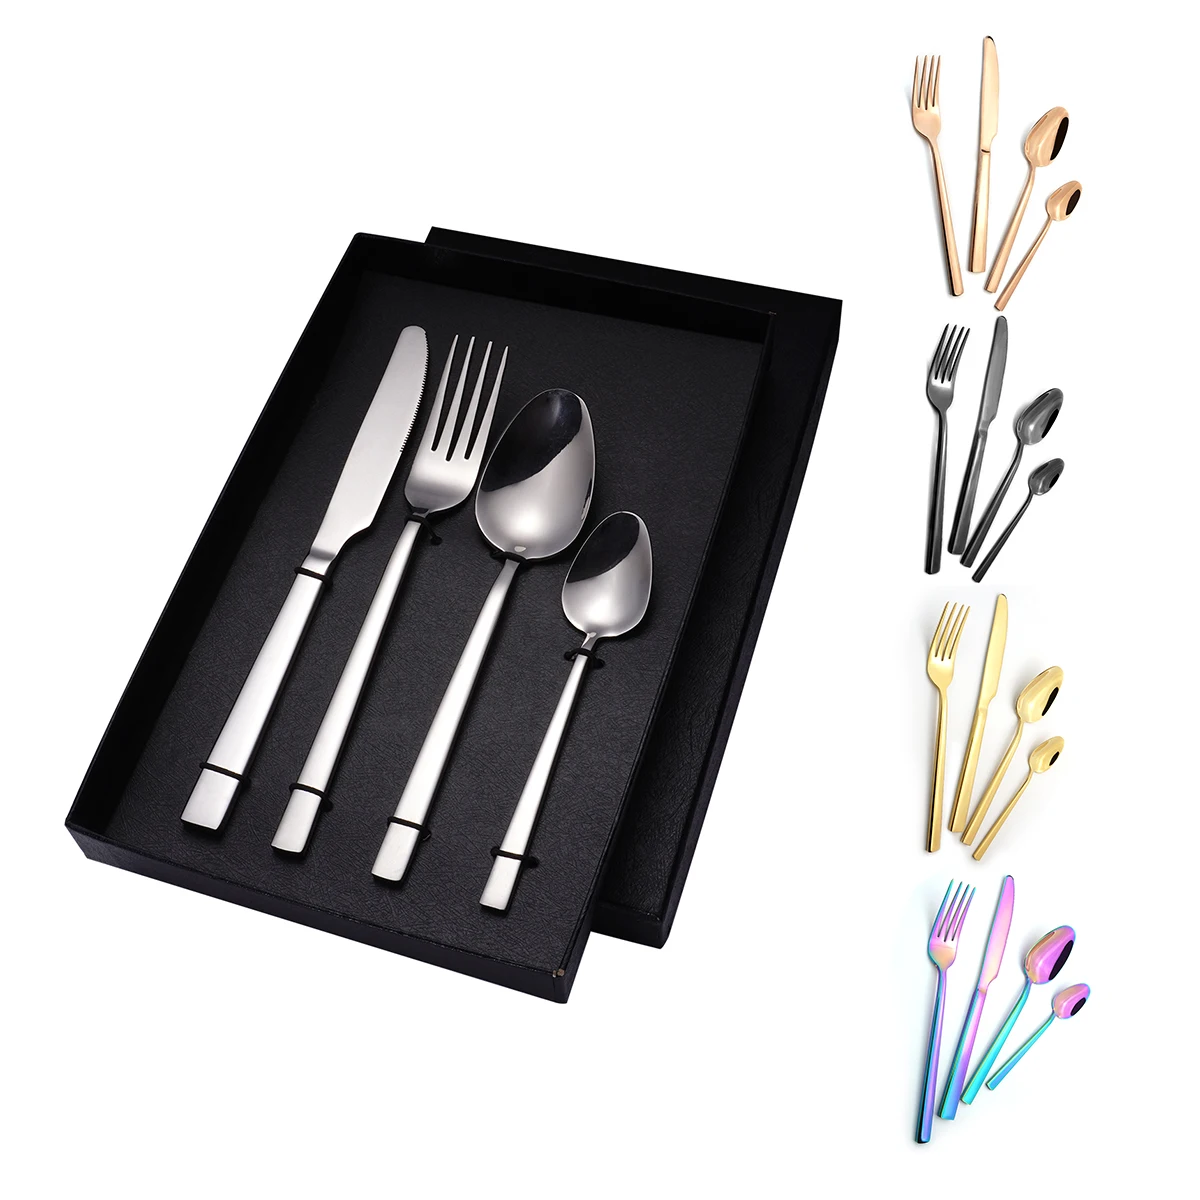 

Wholesale Reusable Polished Forks Spoons Knives Kitchen Flatware Stainless Steel Gold Cutlery Gift Set For Wedding, Silver